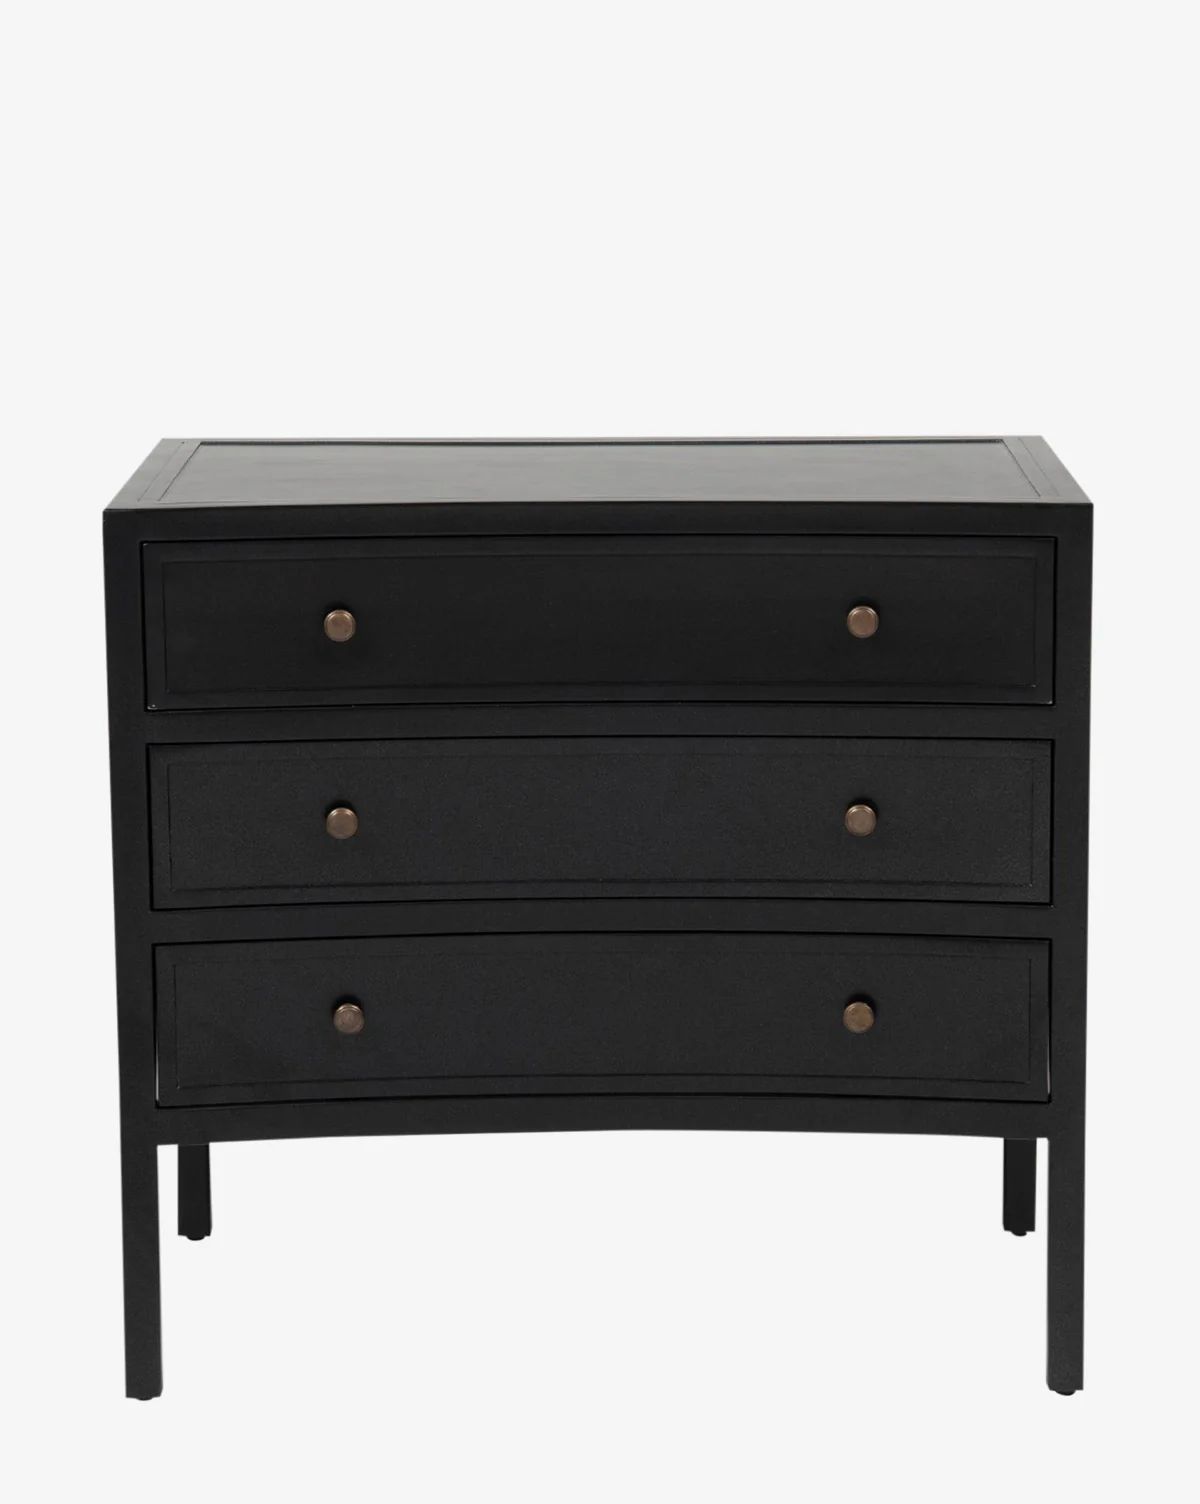 Hale Chest | McGee & Co.